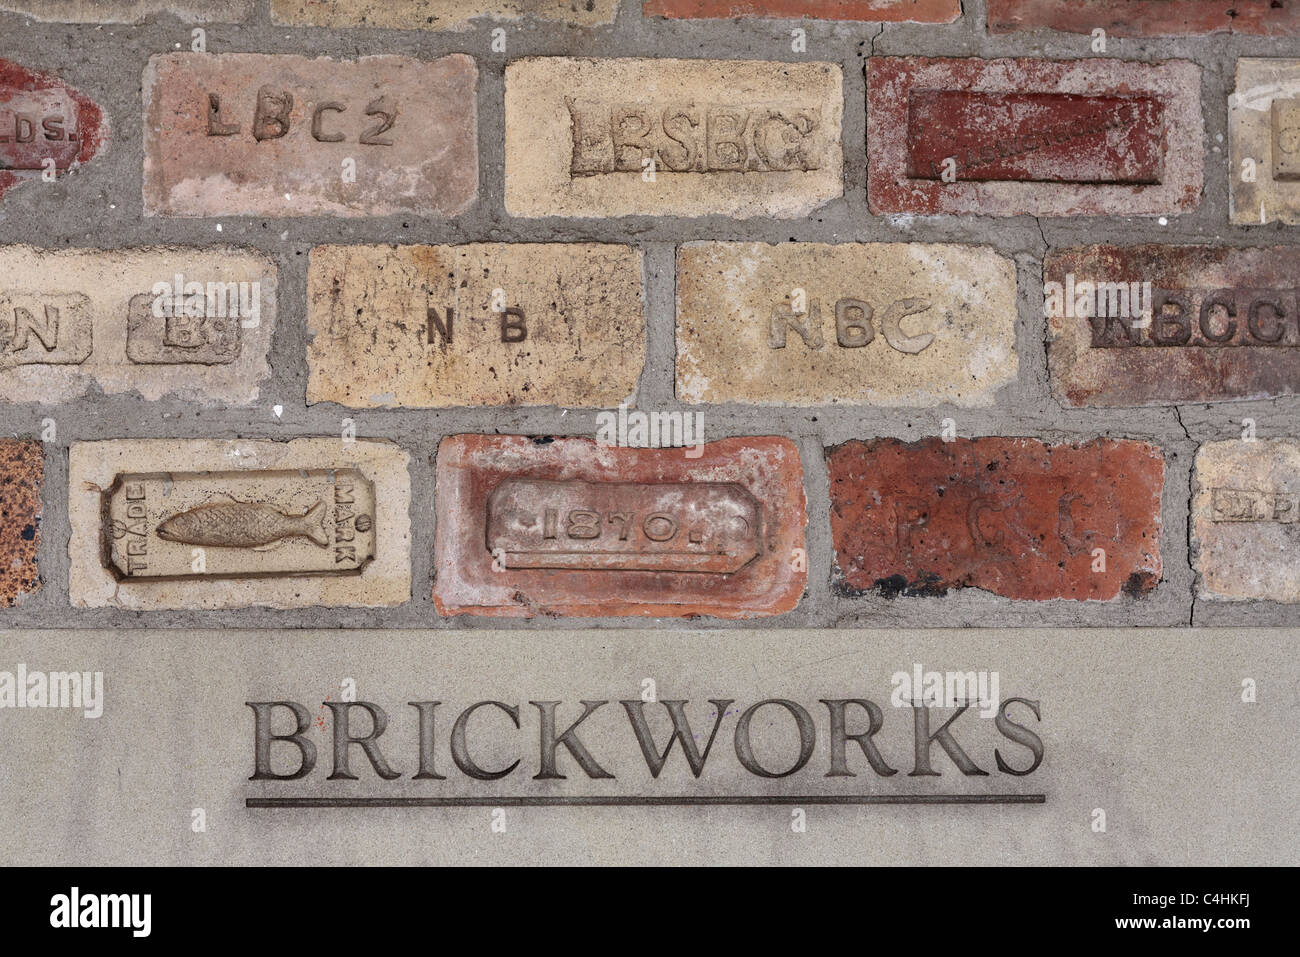 Display of old bricks with manufacturers markings in Beamish museum in Durham, England Stock Photo